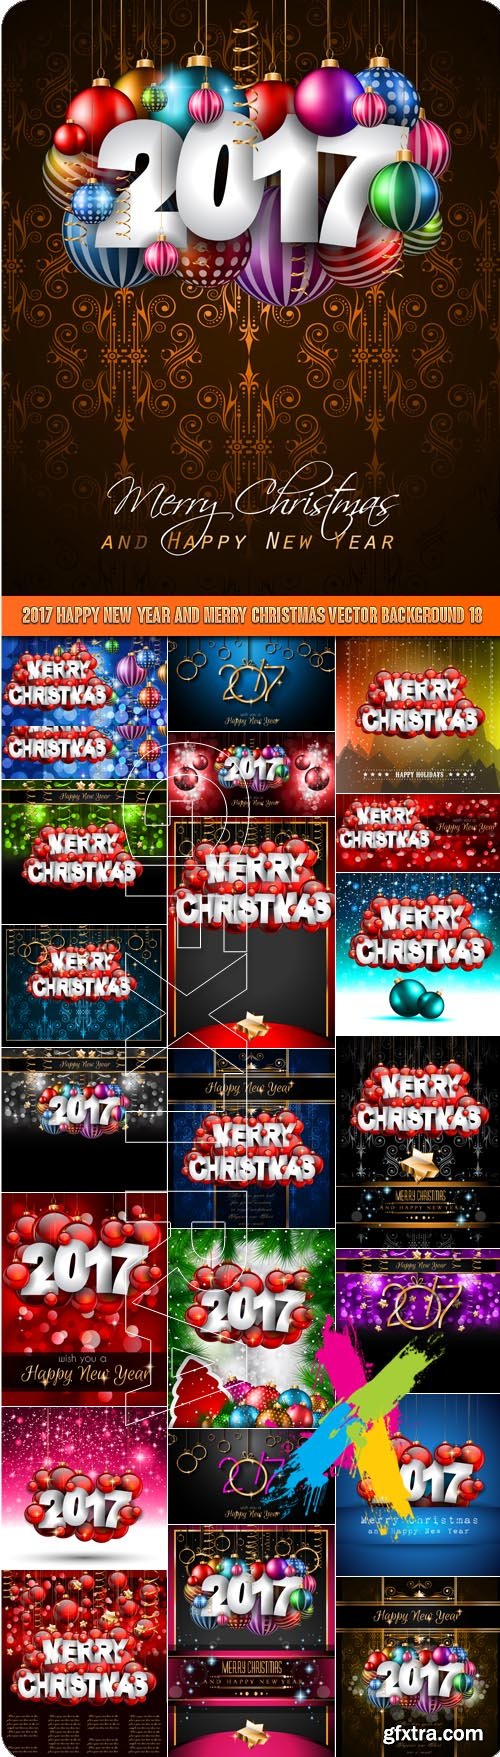 2017 Happy New Year and Merry Christmas vector background 18